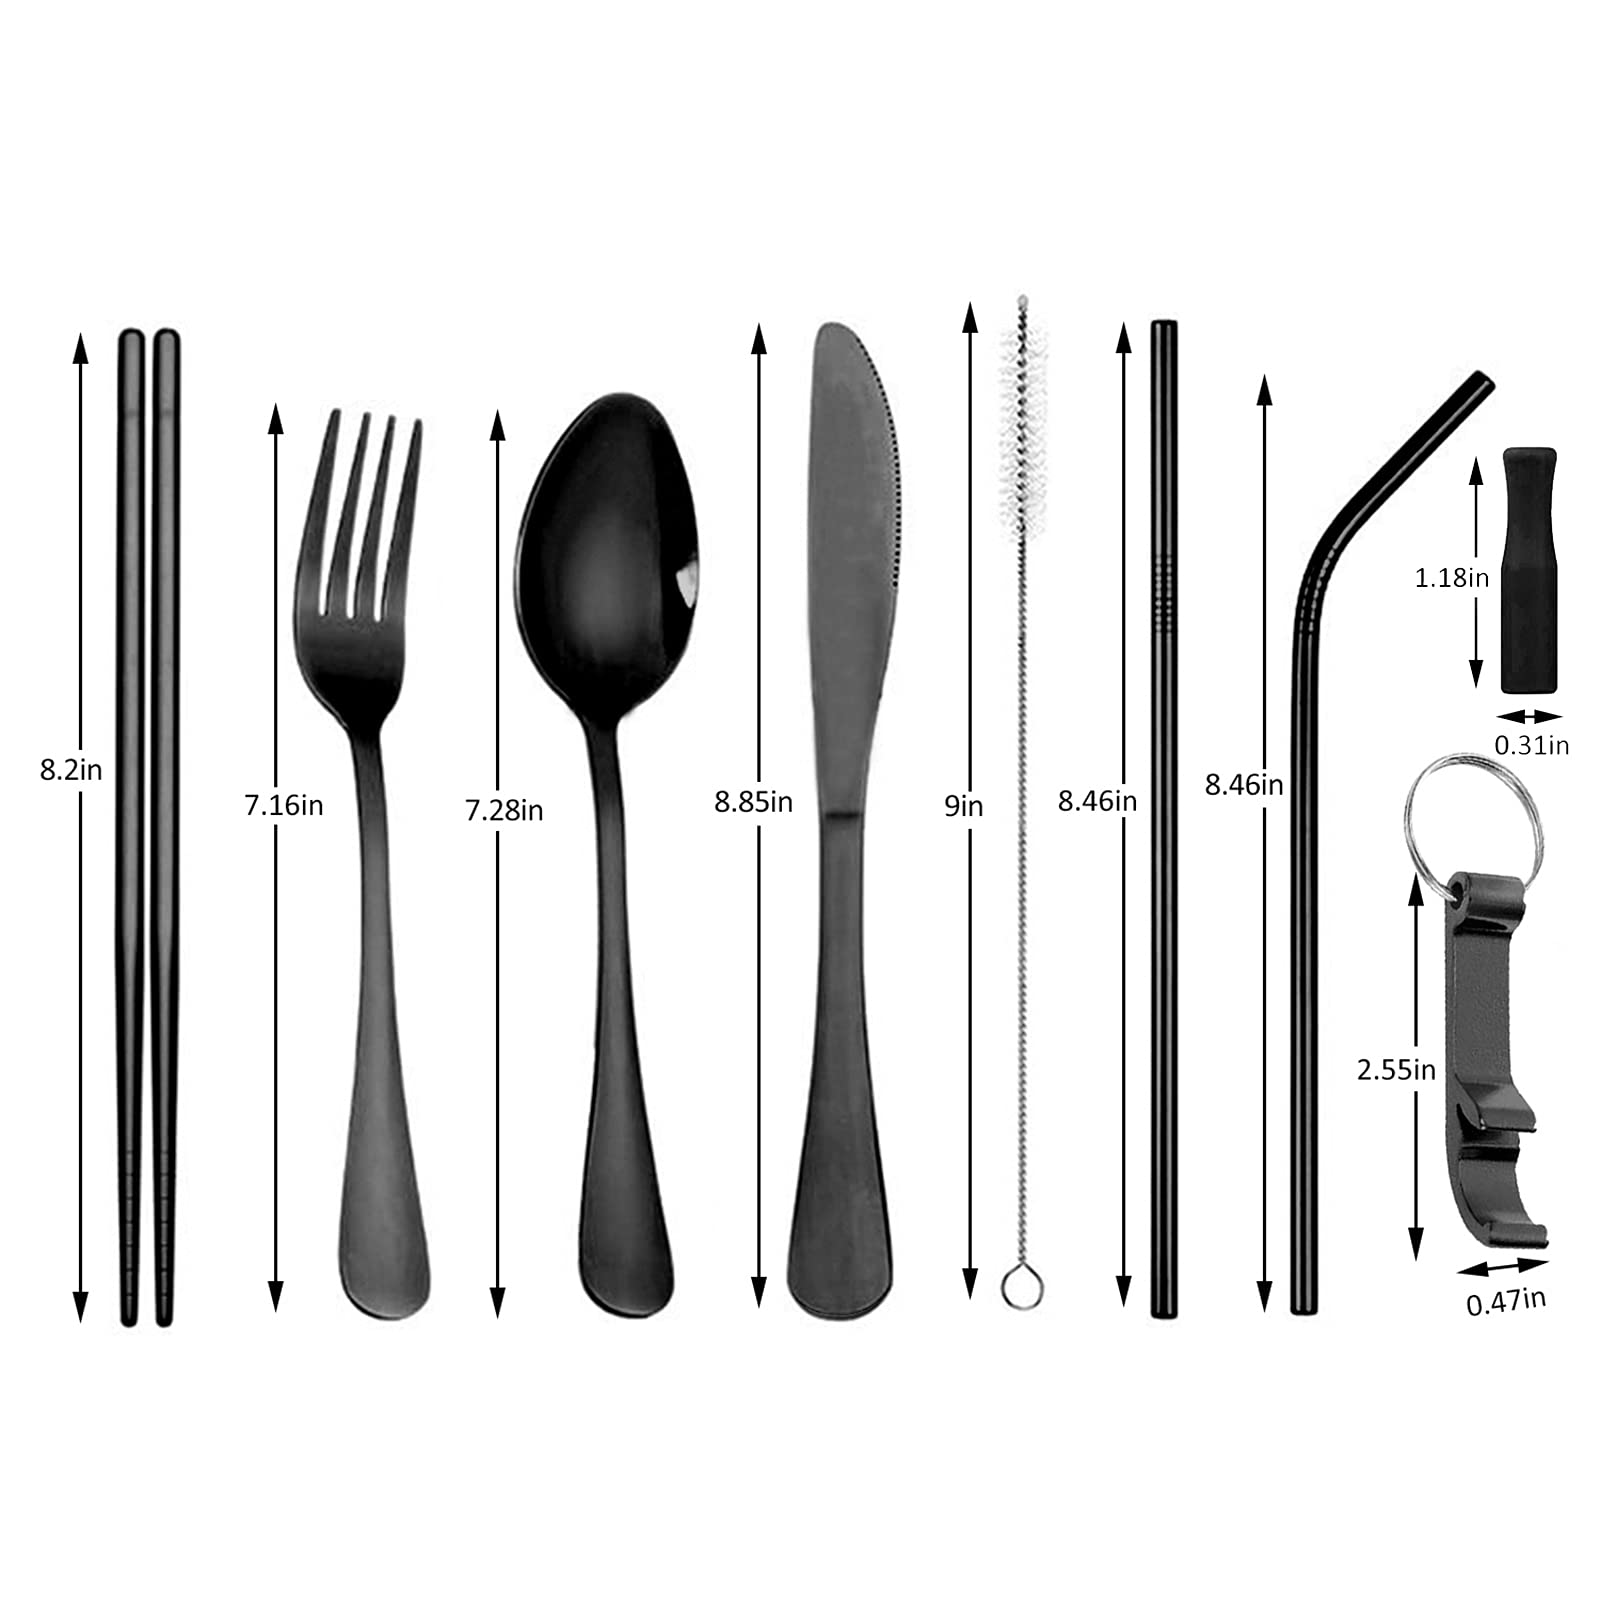 Portable Travel Silverware Set with Case, Reusable Camping Eating Utensils Set, Stainless Steel Cutlery Set for 1, Knife Fork Spoon Chopsticks (9 pieces black)